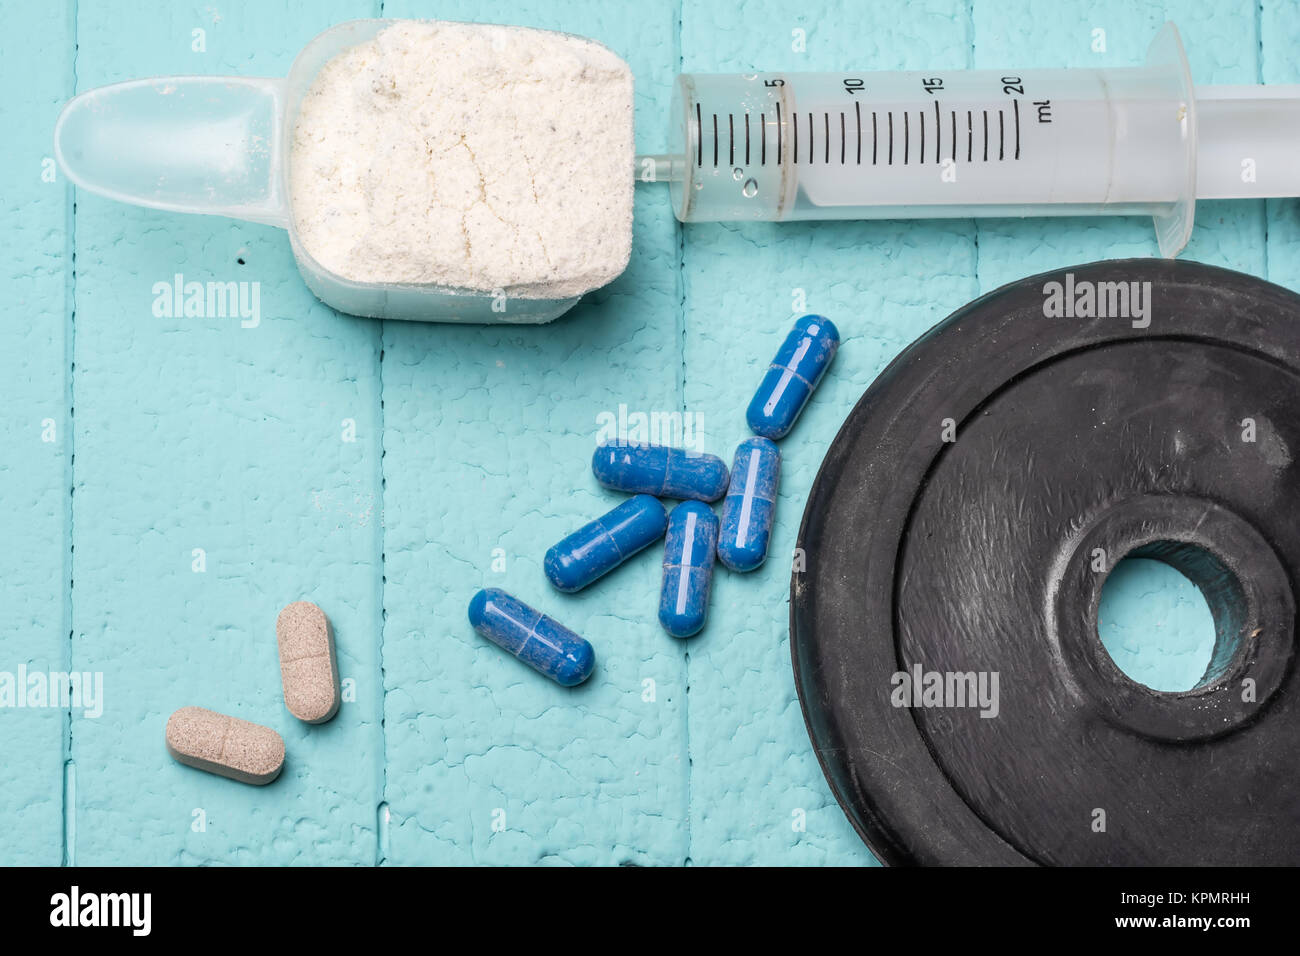 https://c8.alamy.com/comp/KPMRHH/container-of-milk-whey-protein-empty-injection-and-pills-close-up-KPMRHH.jpg